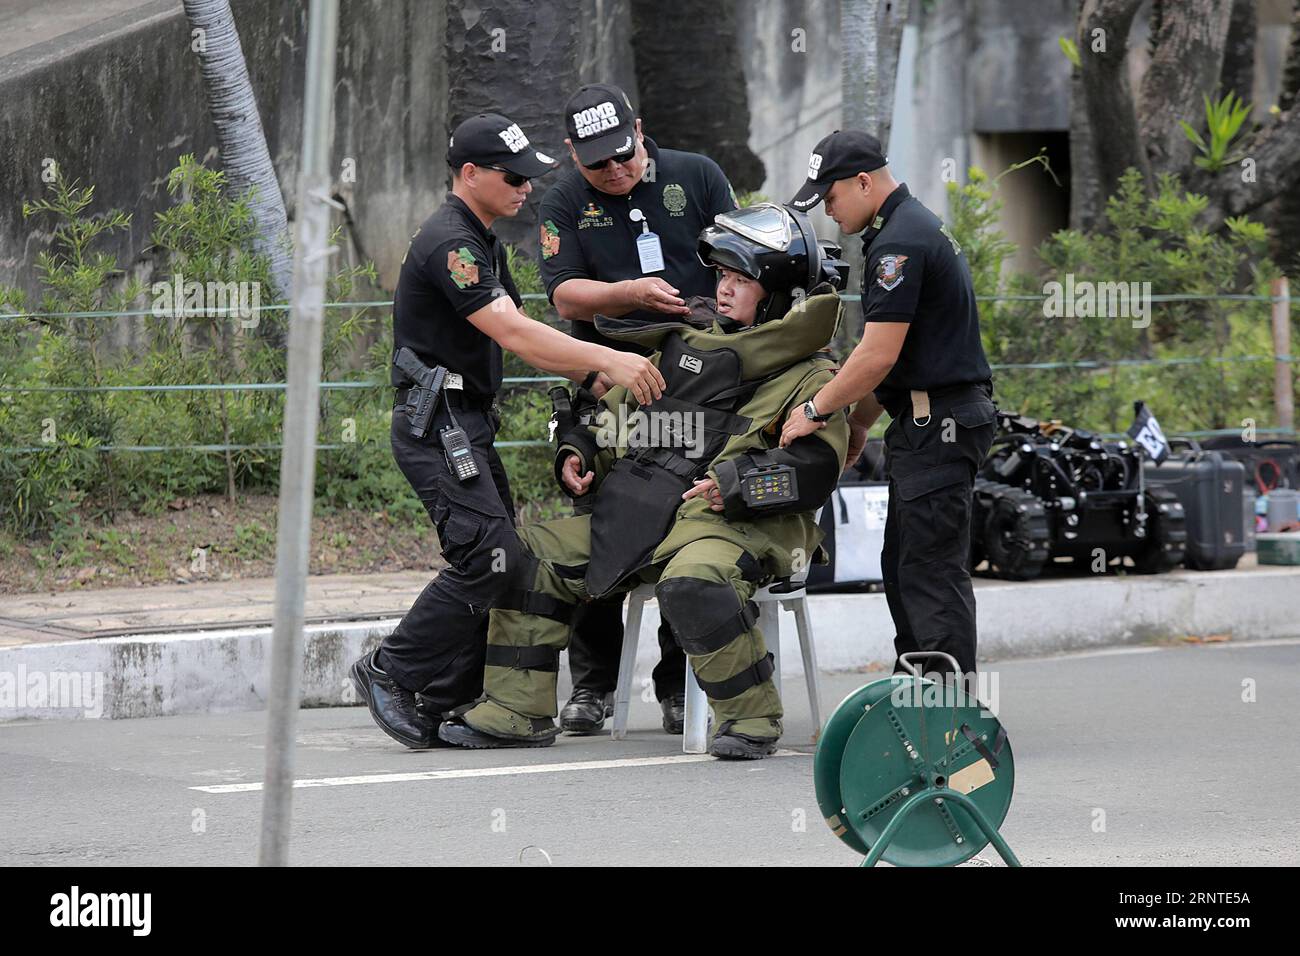 (171107) -- PASAY CITY, Nov. 7, 2017 -- Members of the Philippine National Police Explosive Ordnance Division (PNP-EOD) assist their colleague wearing a bomb suit as they conduct a bomb disposal scenario to show their preparation for the security in the upcoming 31st Association of Southeast Asian Nations (ASEAN) Summit in Pasay City, the Philippines, on Nov. 7, 2017. )(axy) PHILIPPINES-PASAY CITY-ASEAN-BOMB DISPOSAL SCENARIO ROUELLExUMALI PUBLICATIONxNOTxINxCHN Stock Photo